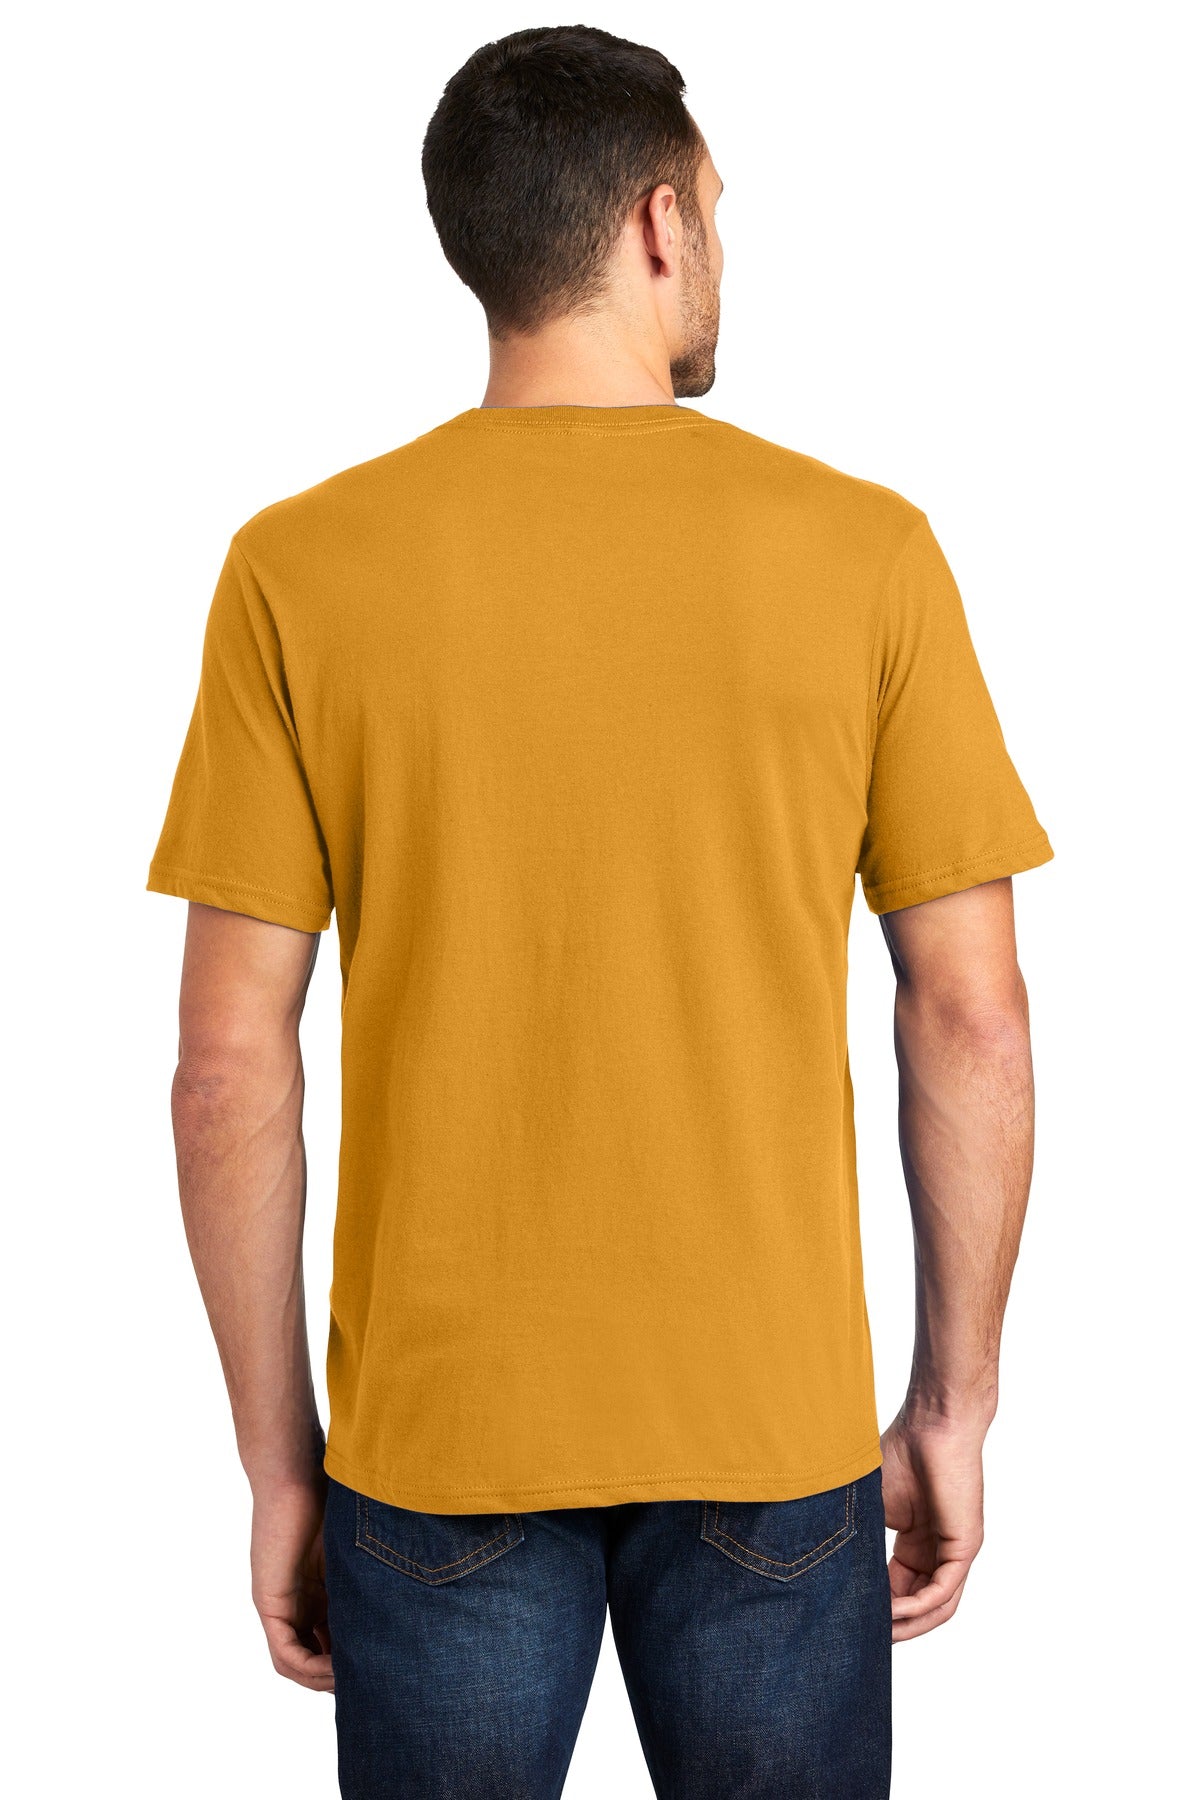 District® Very Important Tee®. DT6000 [Gold] - DFW Impression